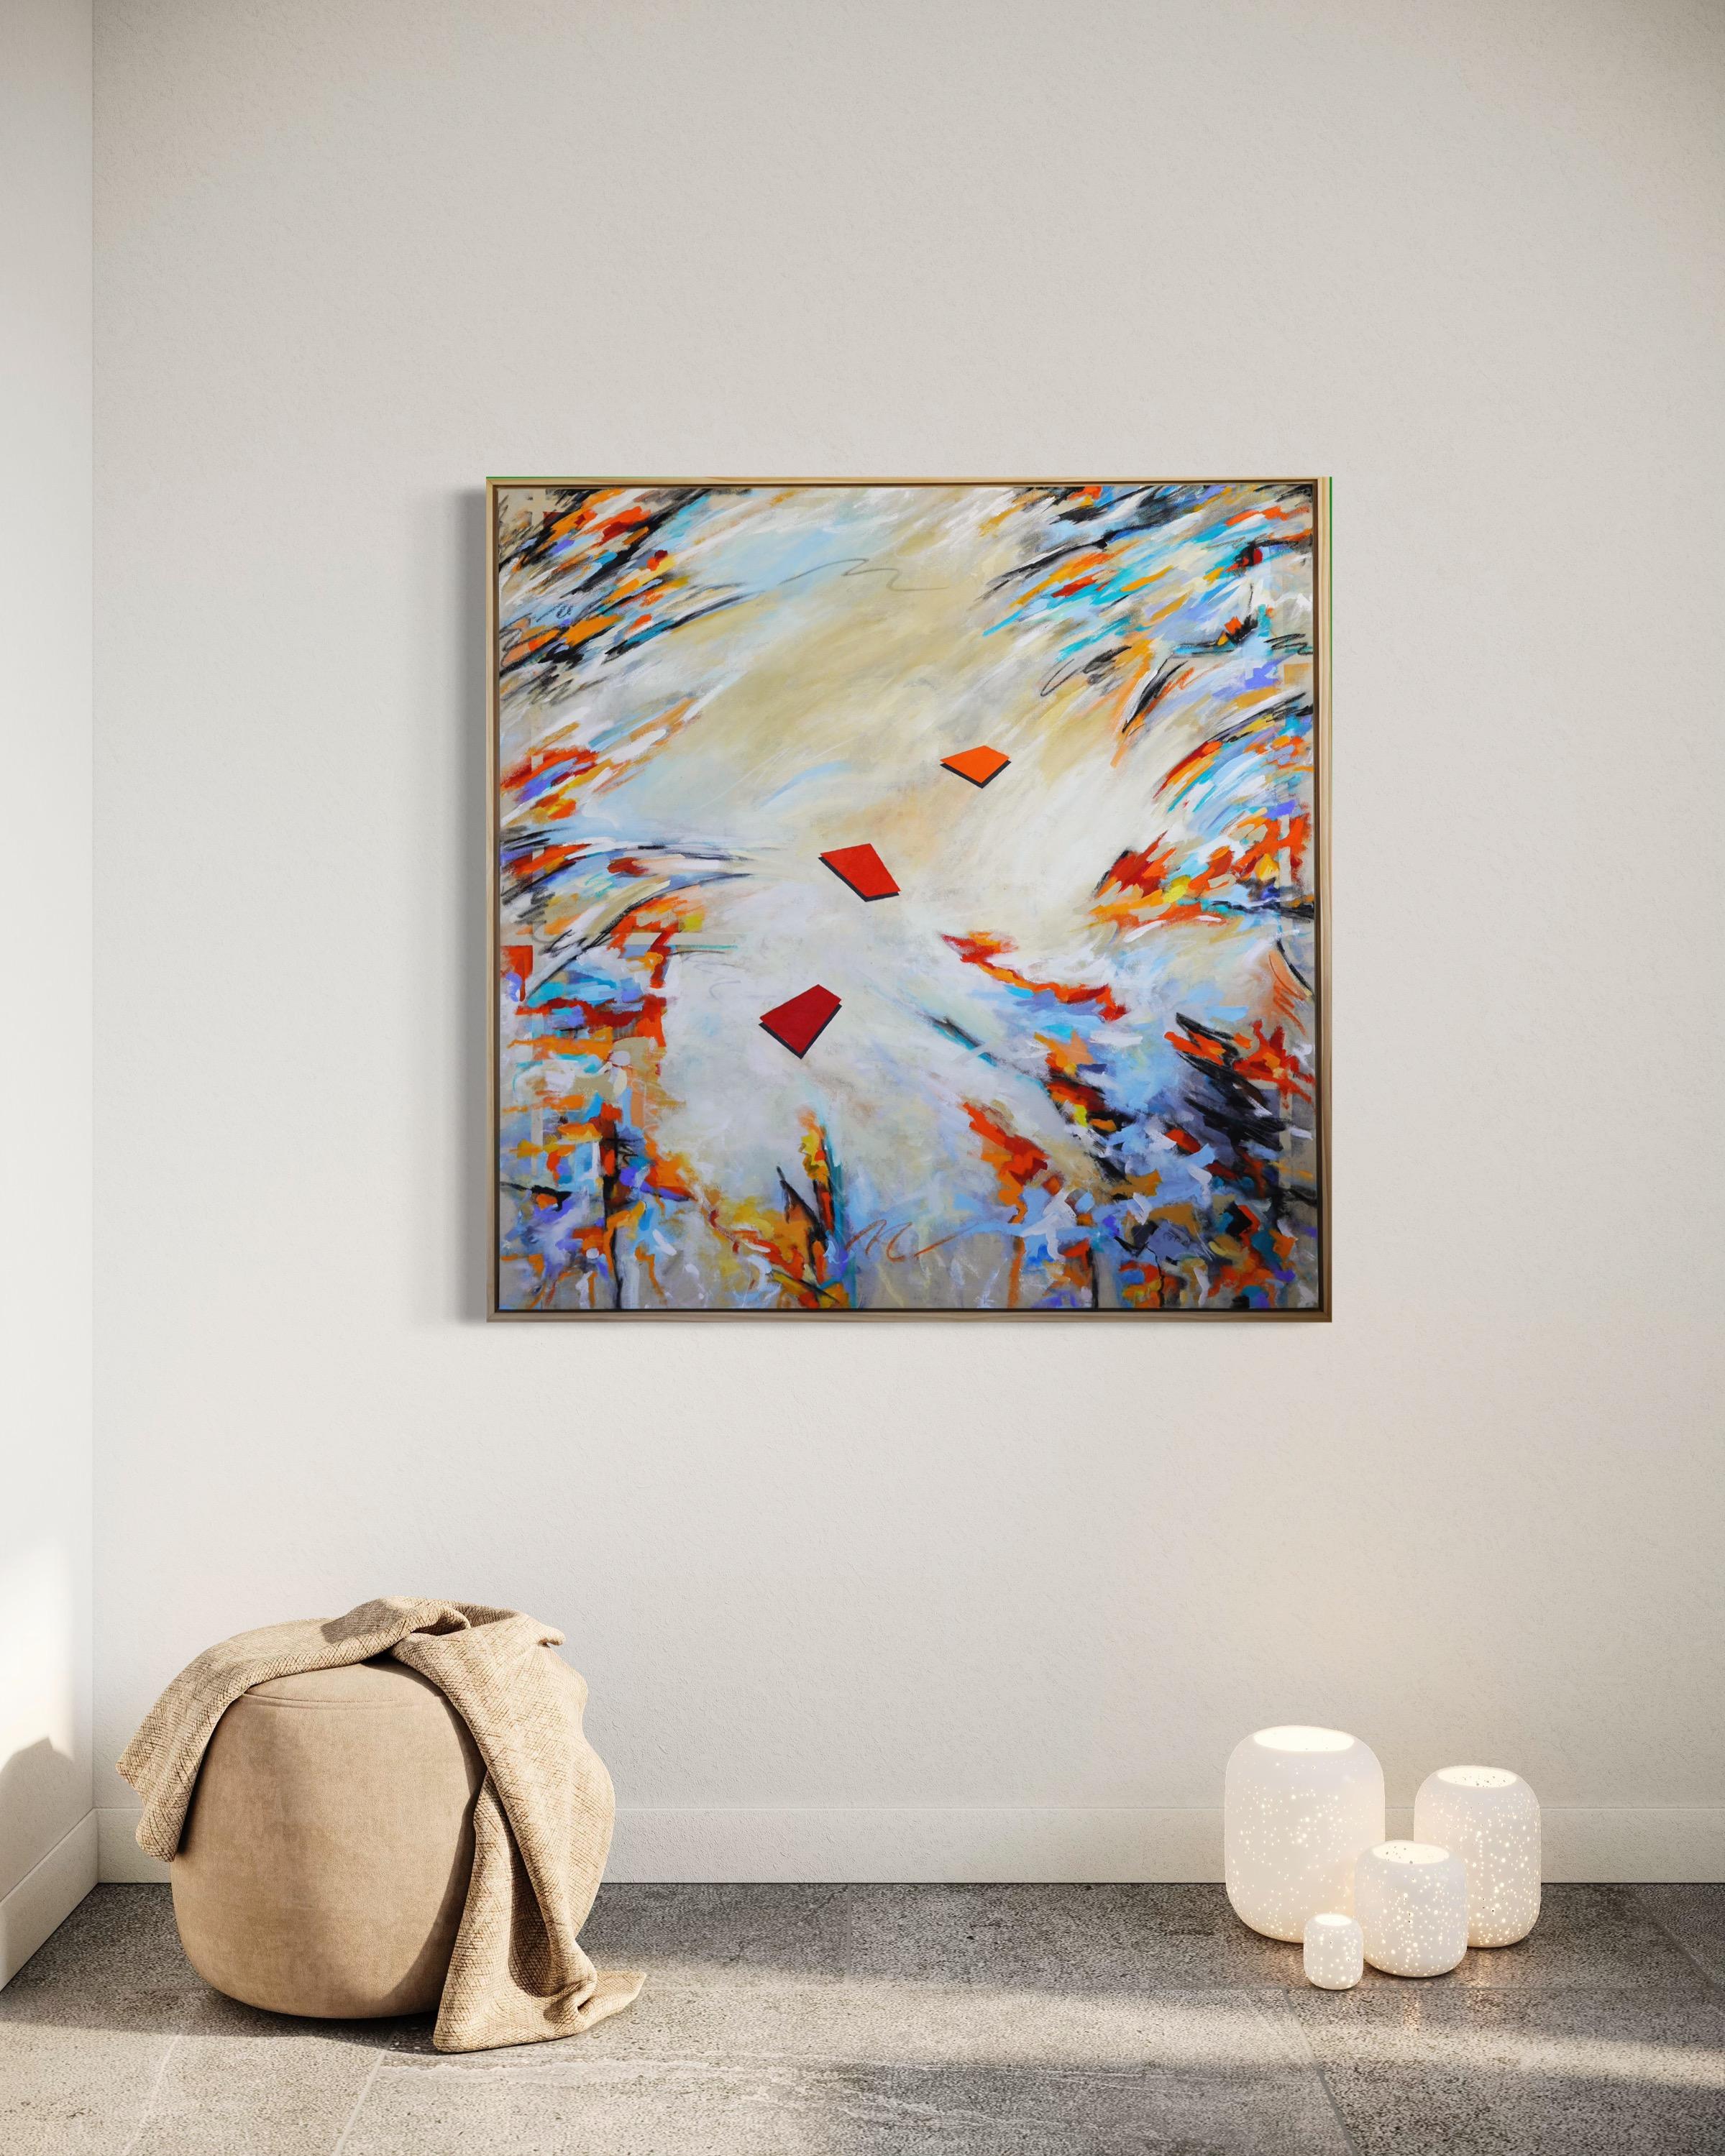 Chromatic Expression II. Big modern colorful Painting on raw canvas wood framed  - Abstract Mixed Media Art by Cari Cohen